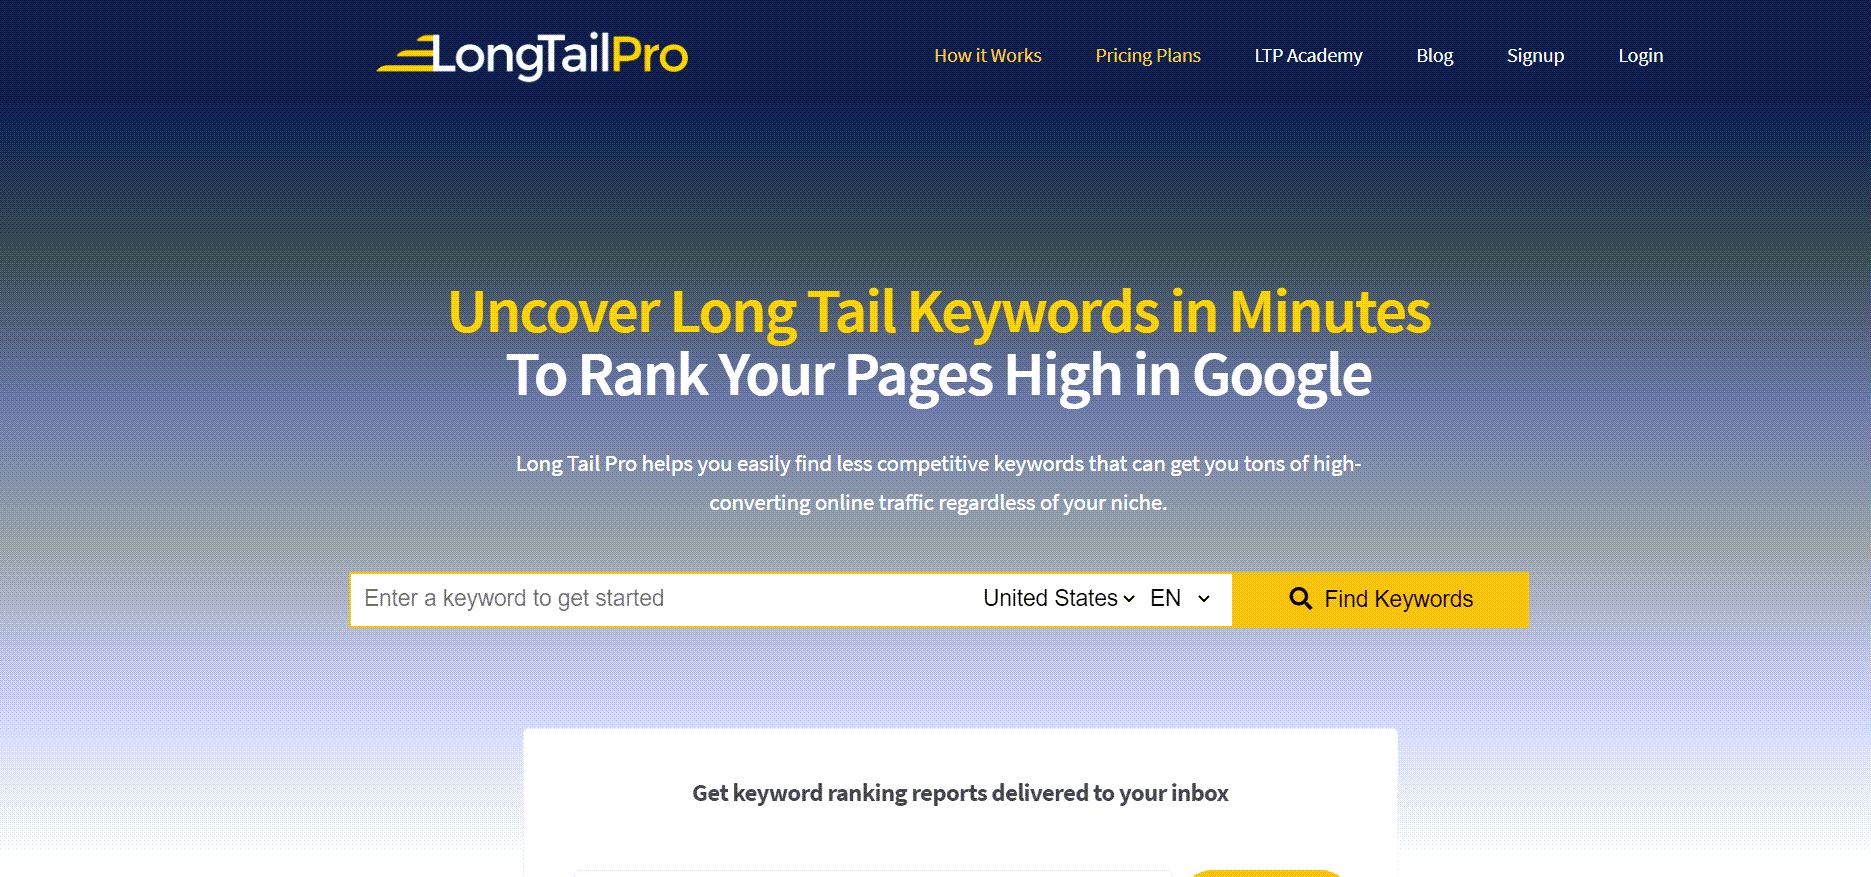 long tail pro review 2